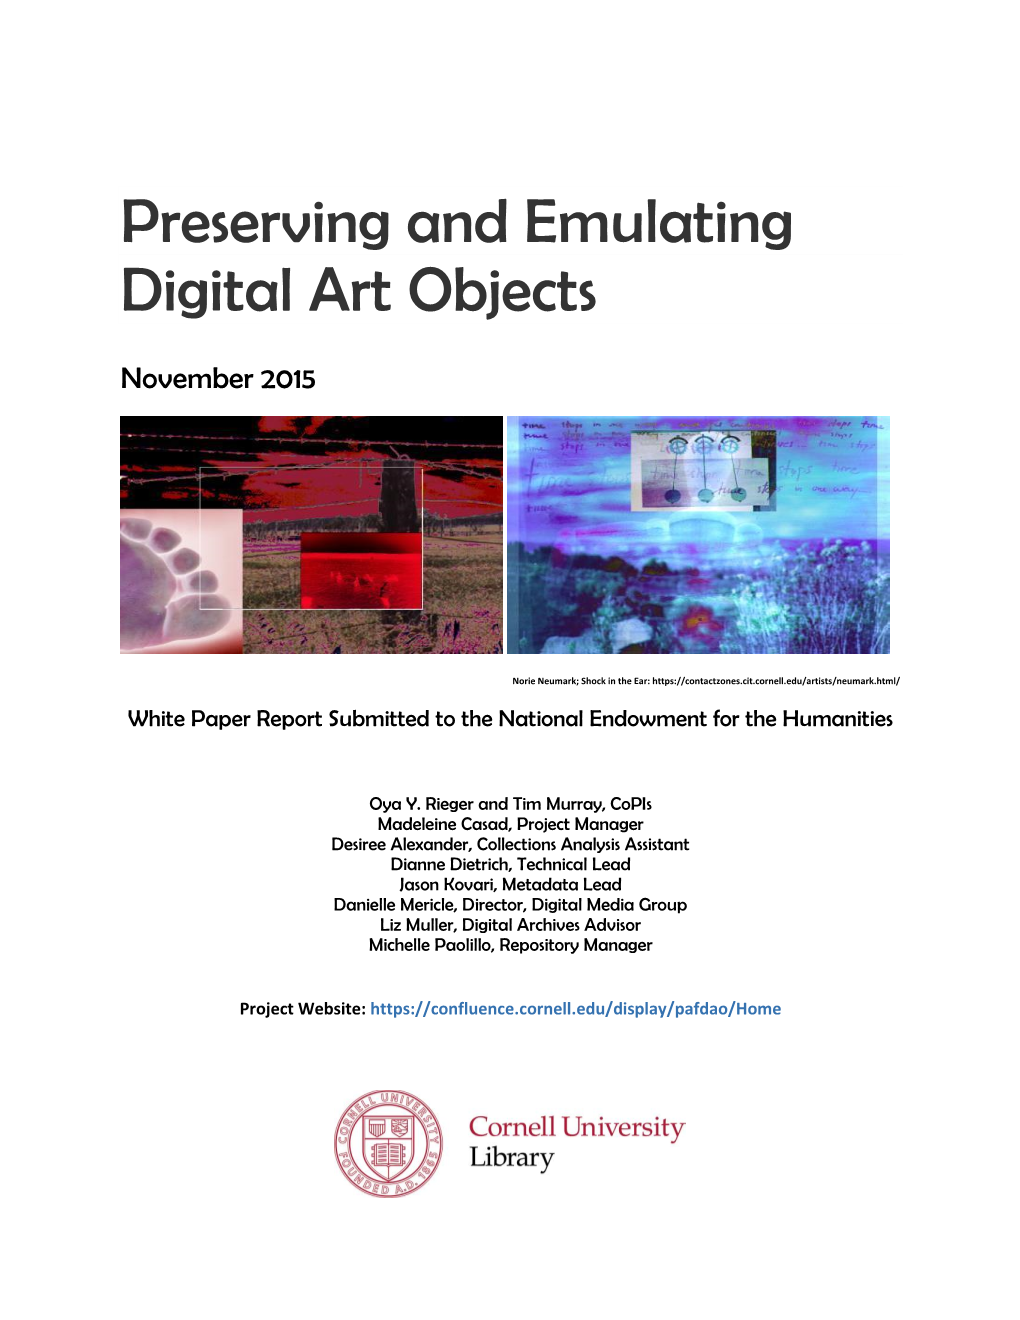 Preserving and Emulating Digital Art Objects